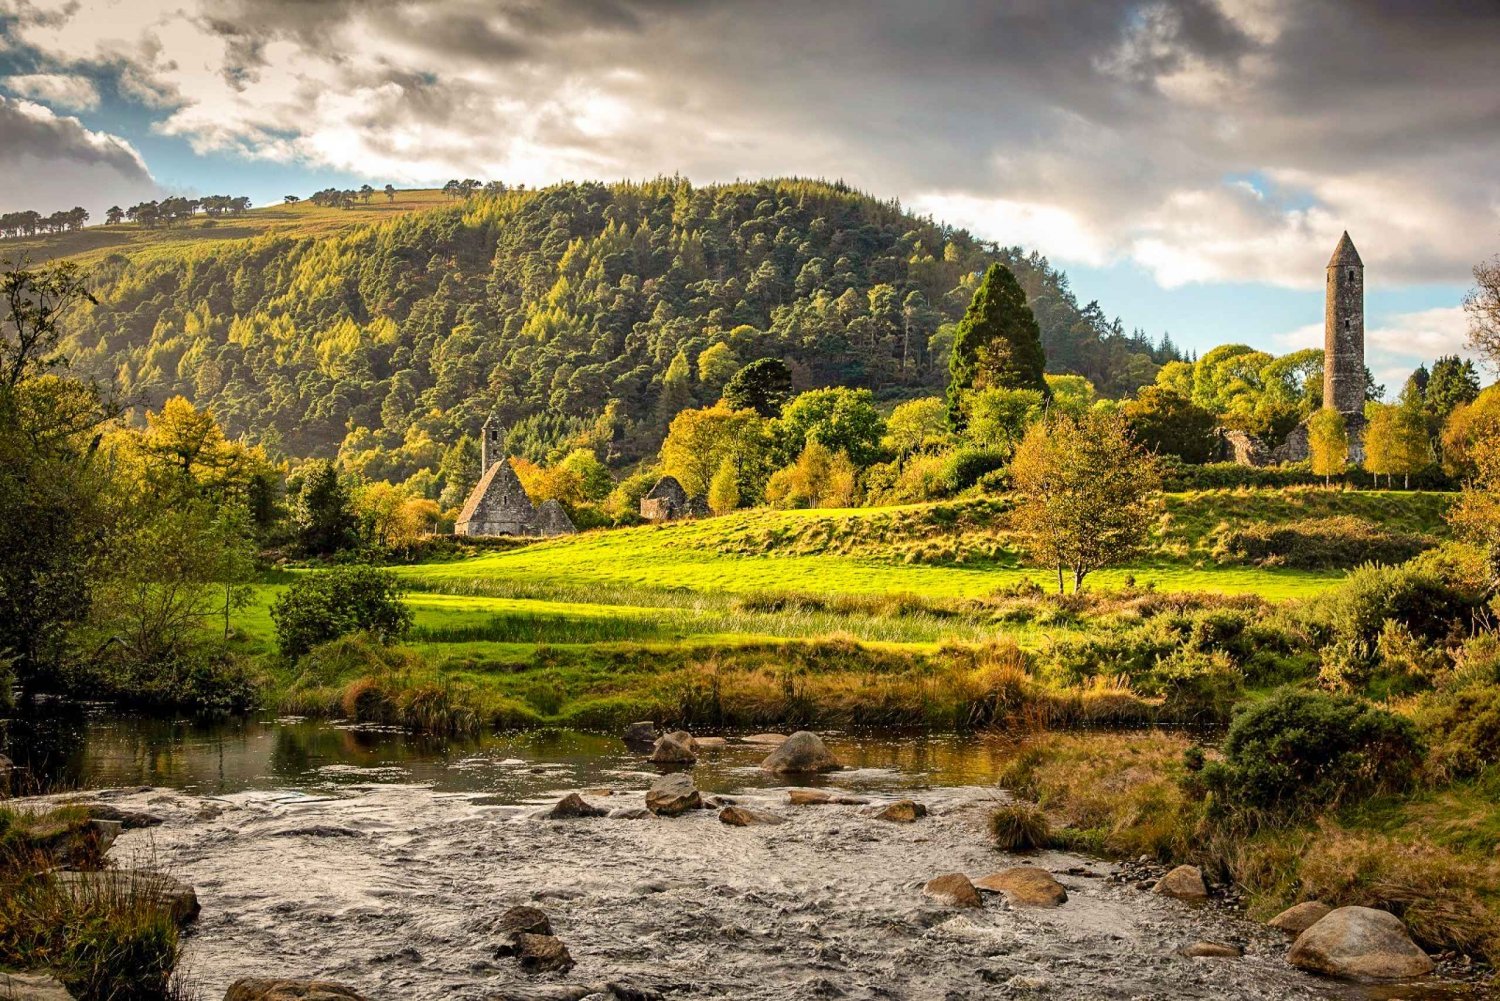 Glendalough and Wicklow Half-Day Tour from Dublin